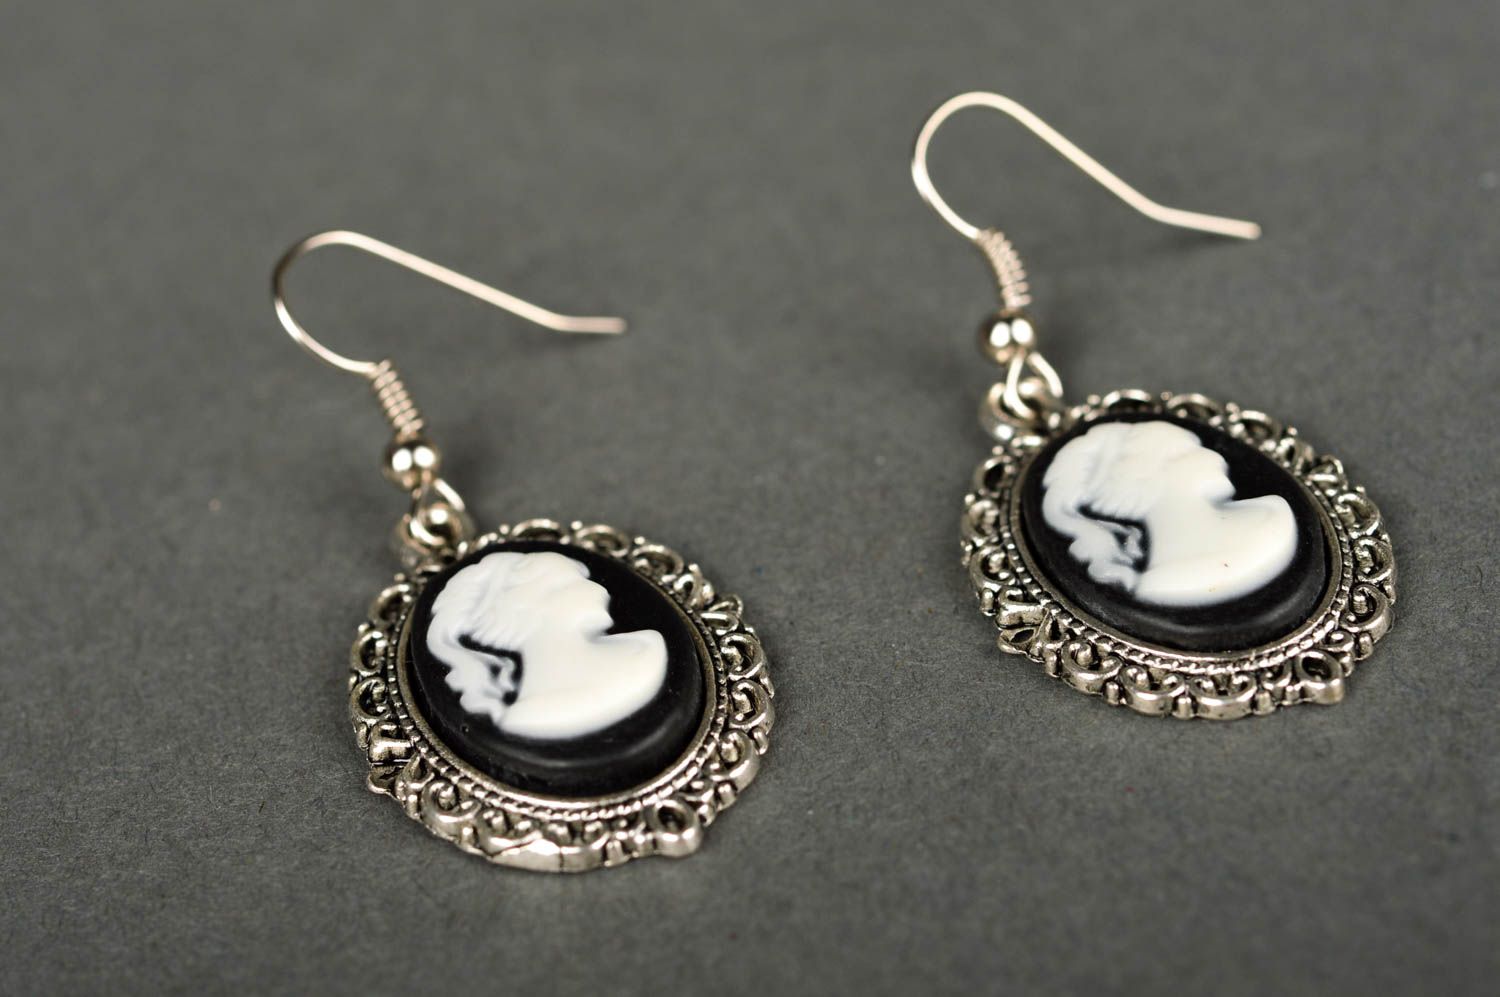 Handmade earrings with cameo, handmade bijouterie accessory for women great gift photo 3